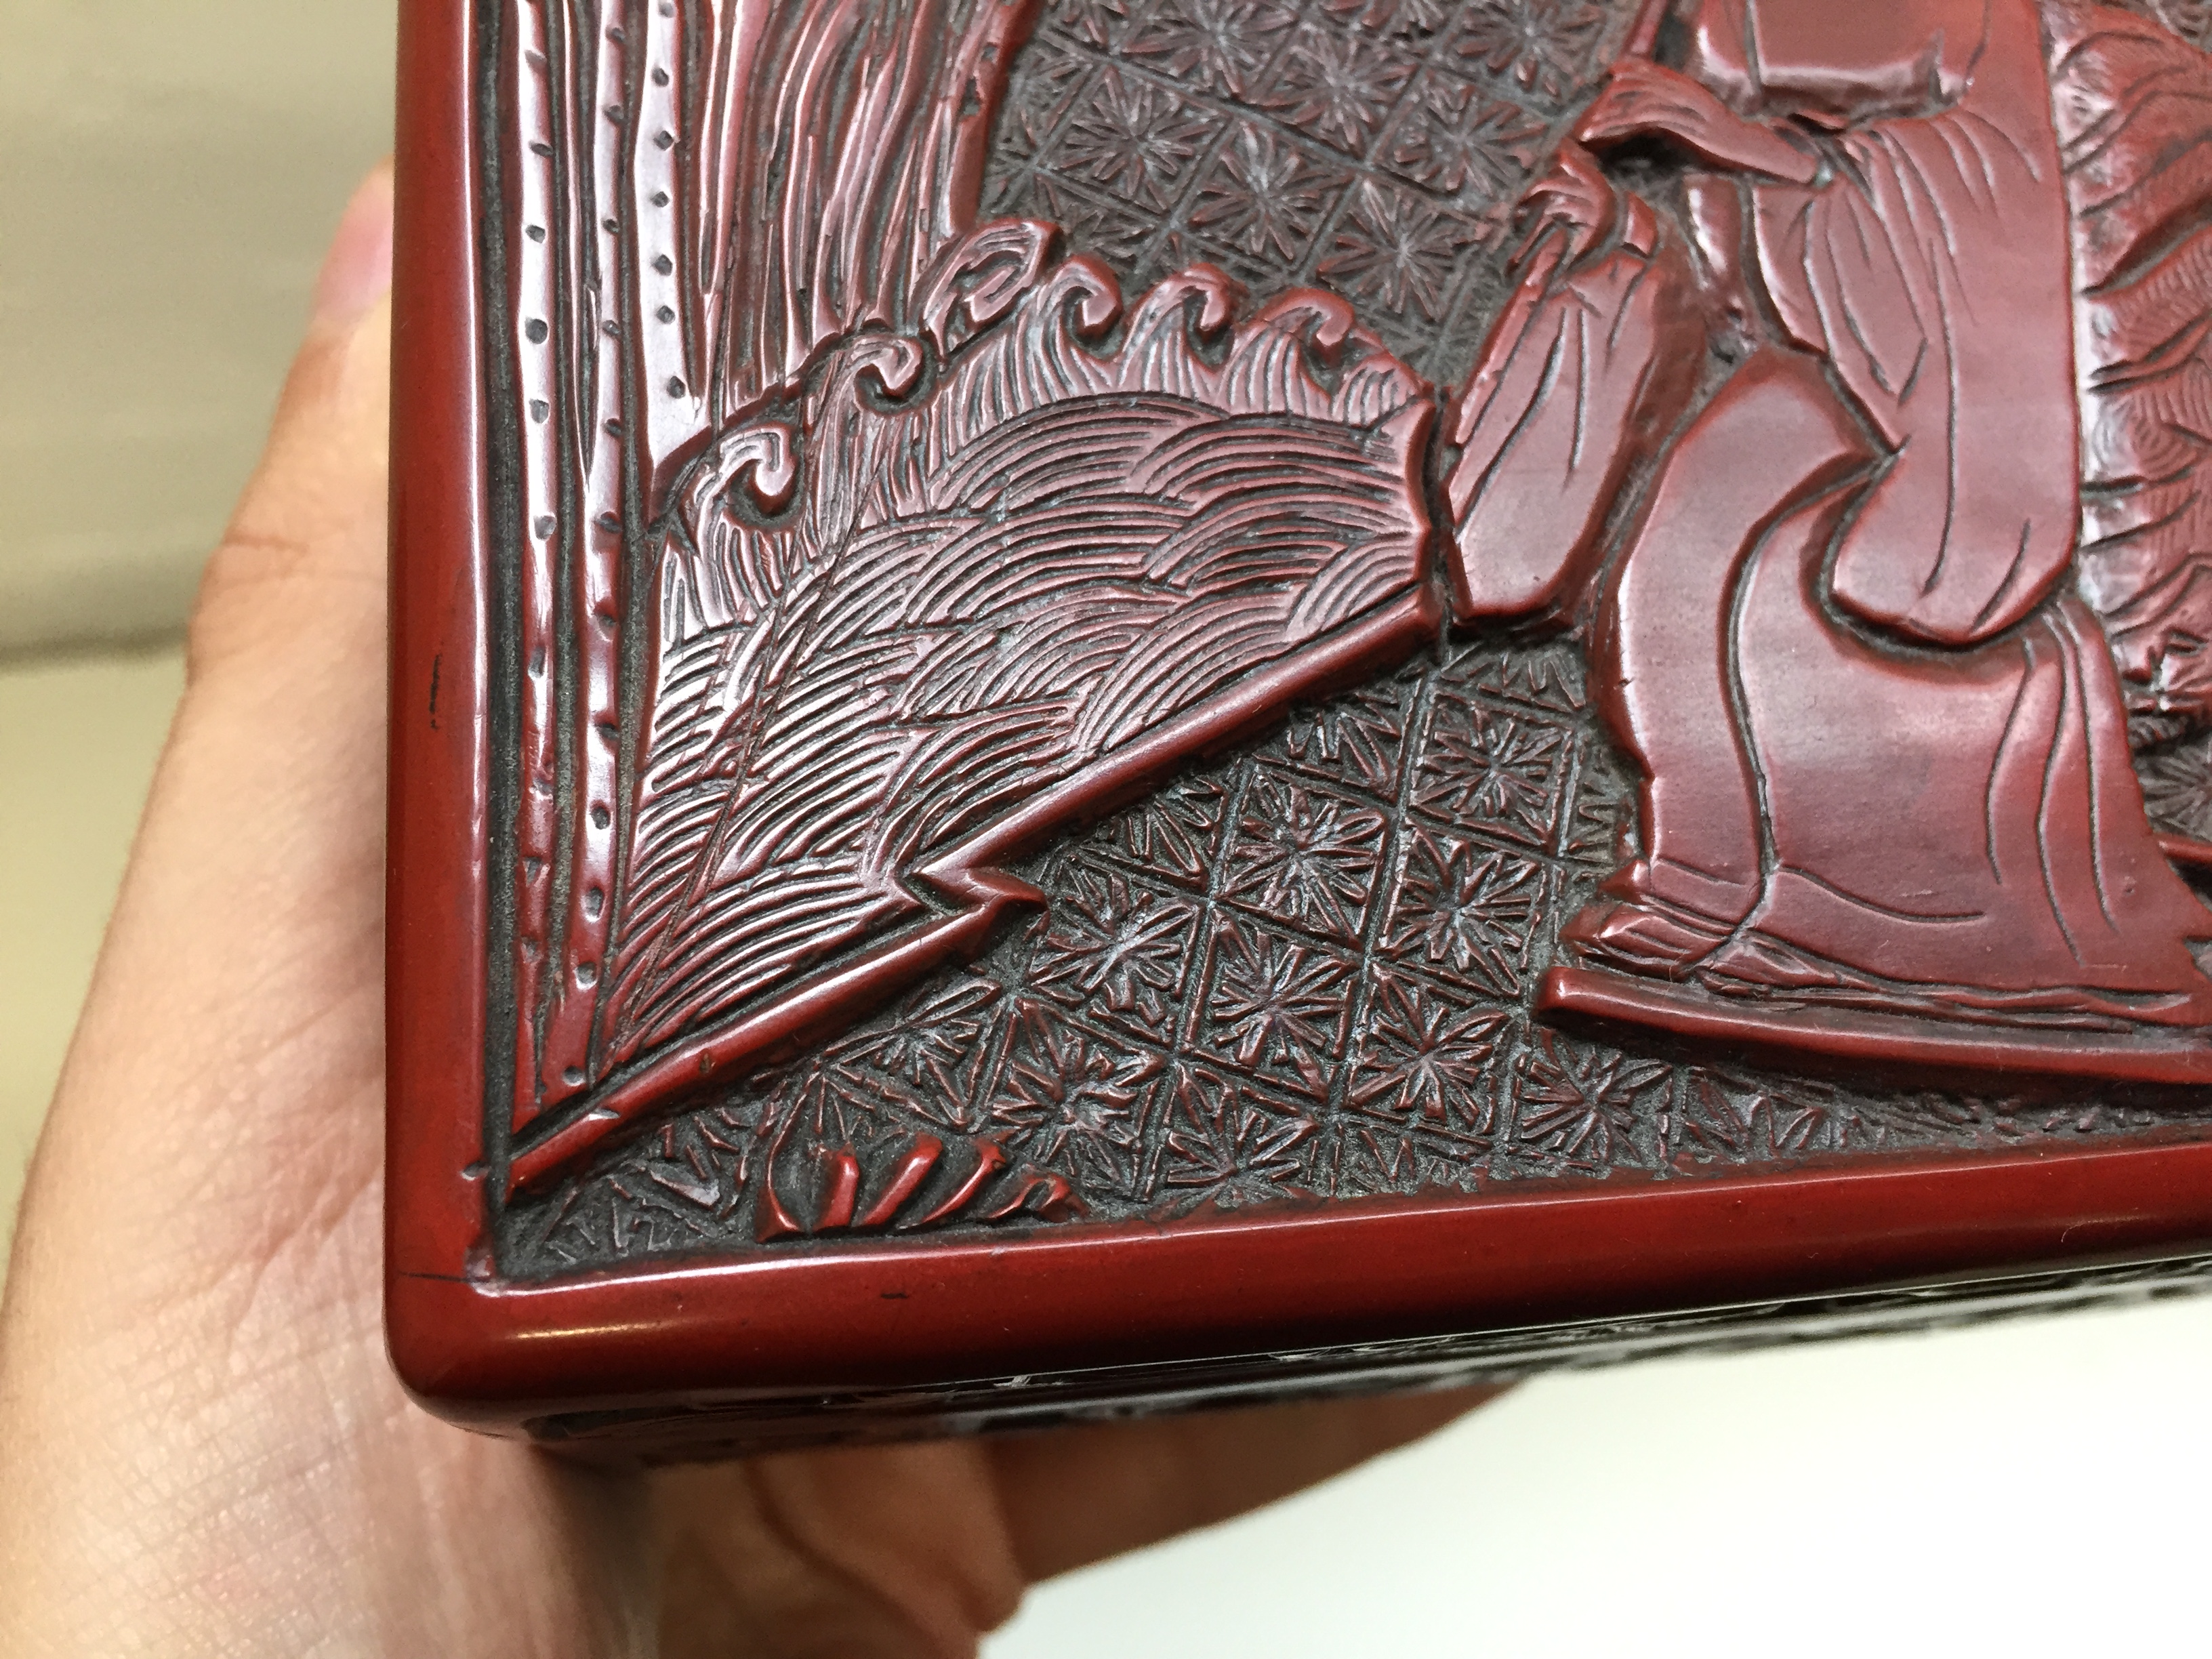 A CHINESE CINNABAR LACQUER 'MUSICIAN' BOX AND COVER 晚明 剔紅圖高士行樂圖紋蓋盒 - Image 7 of 20